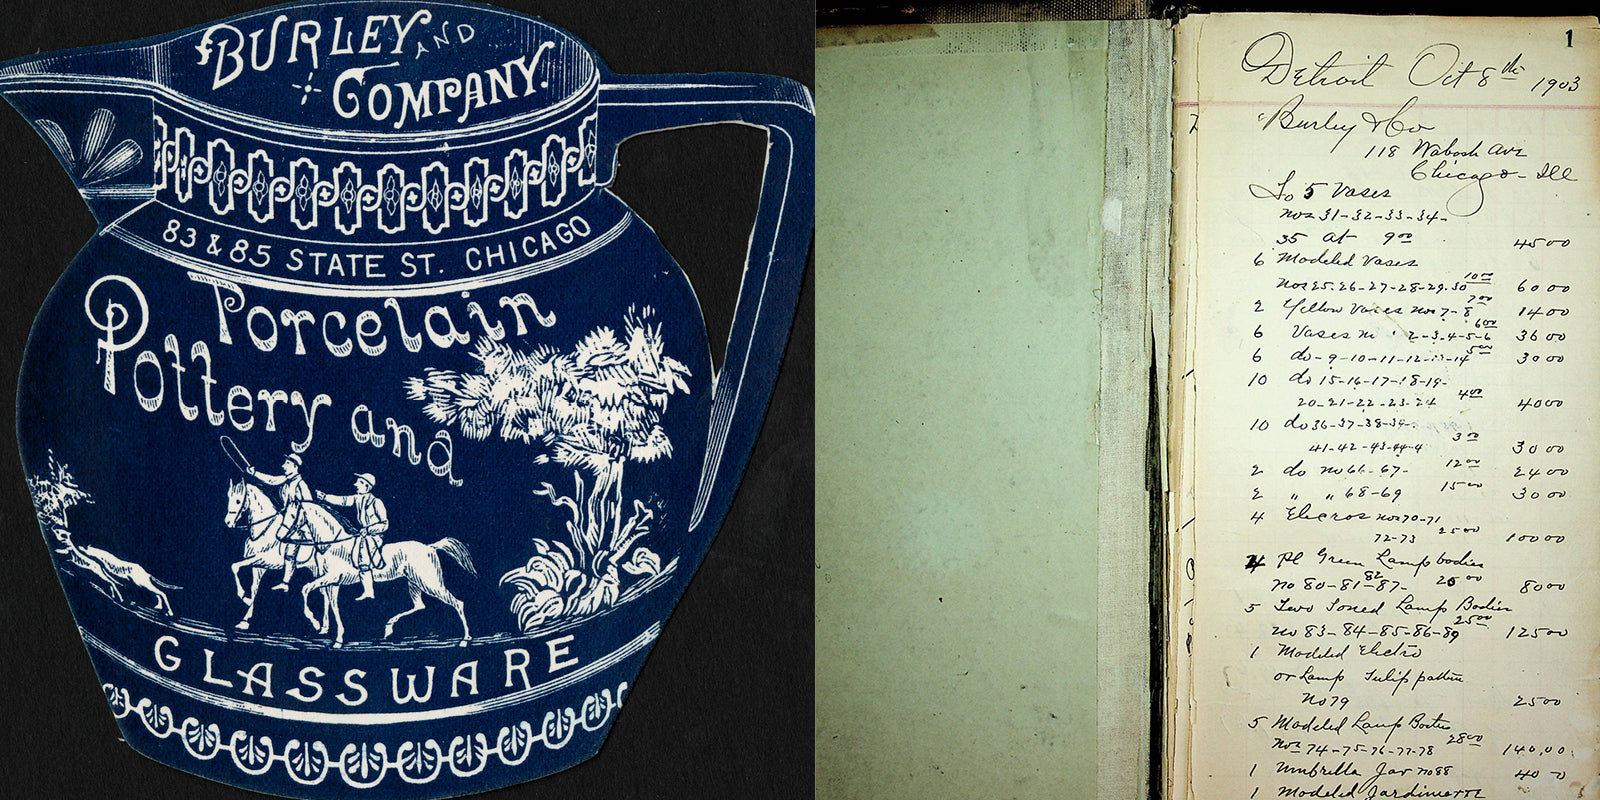 Burley and Company logo (left) and Pewabic’s first order recorded in Mary Chase Perry’s daybook (right)